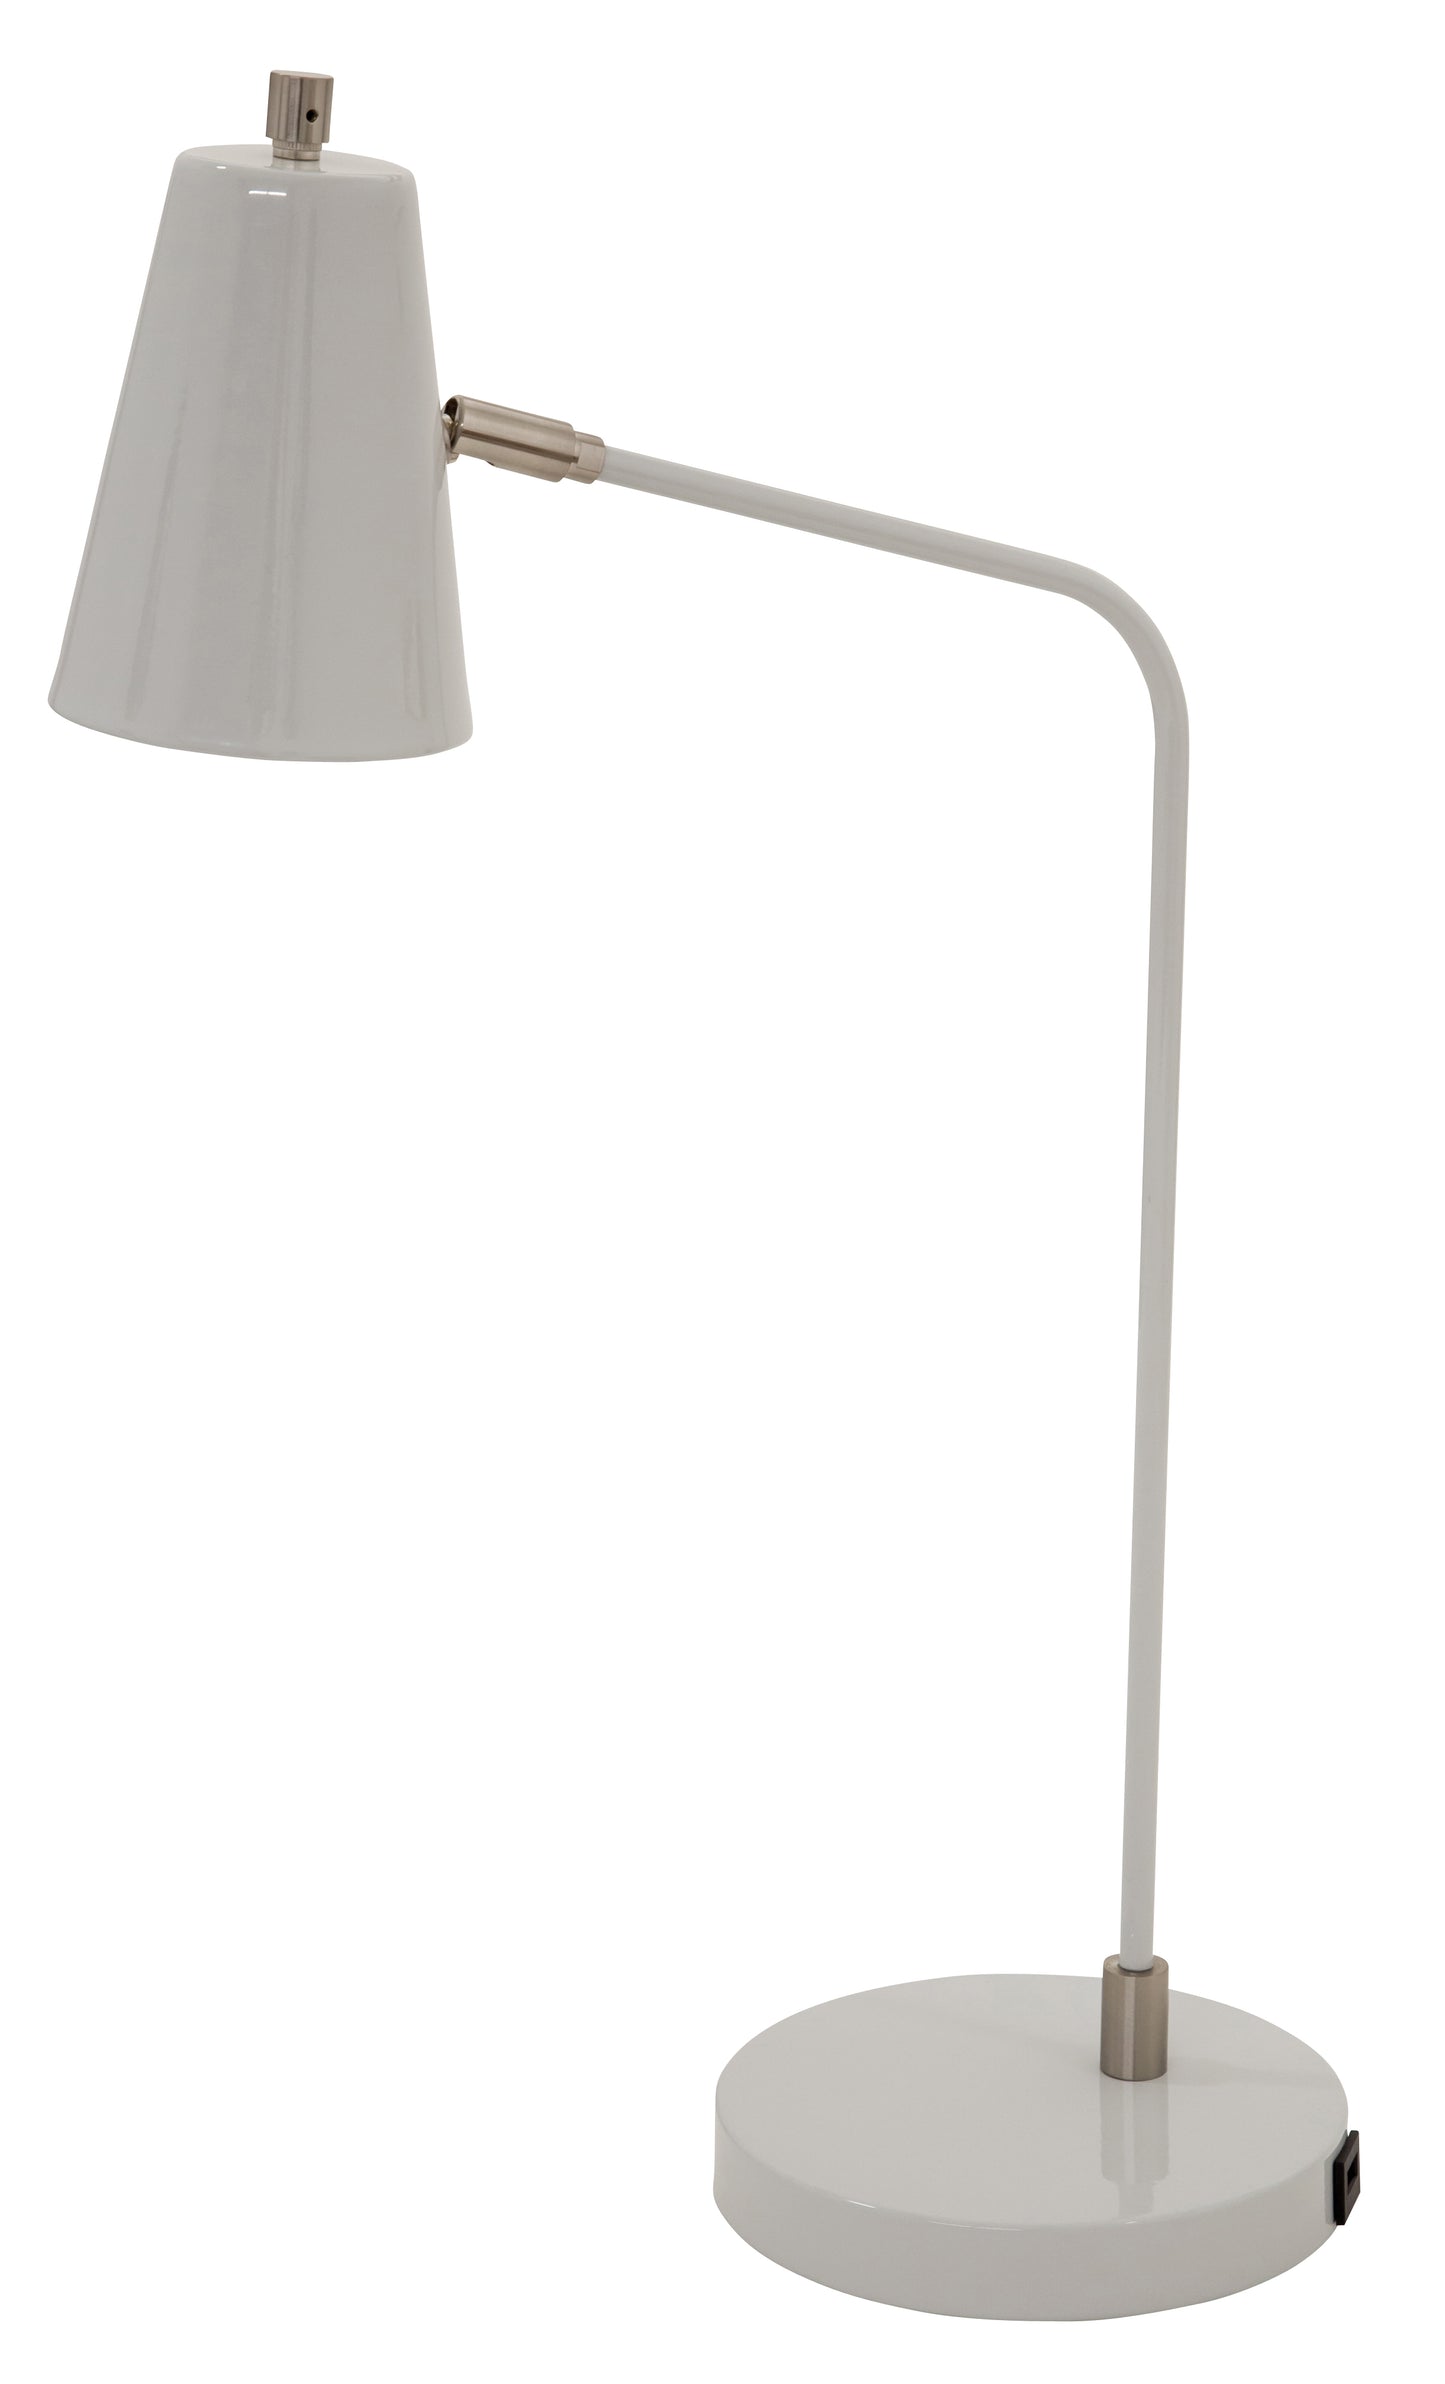 House of Troy Kirby LED task lamp in gray with satin nickel accents and USB port K150-GR